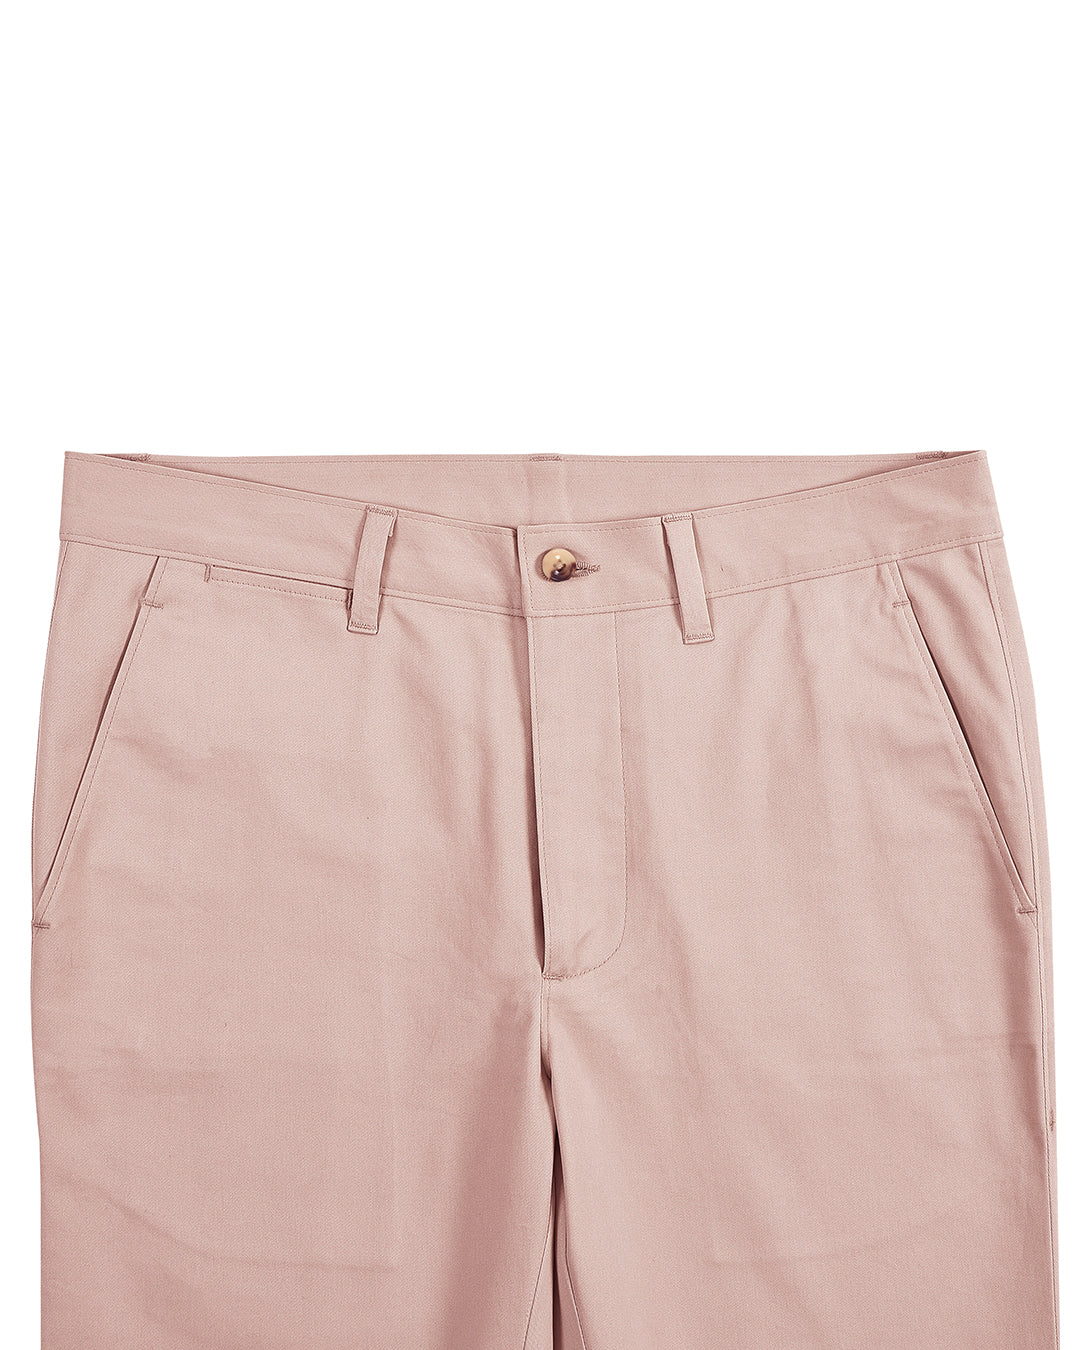 Front view of custom Genoa Chino pants for men by Luxire in pale pink